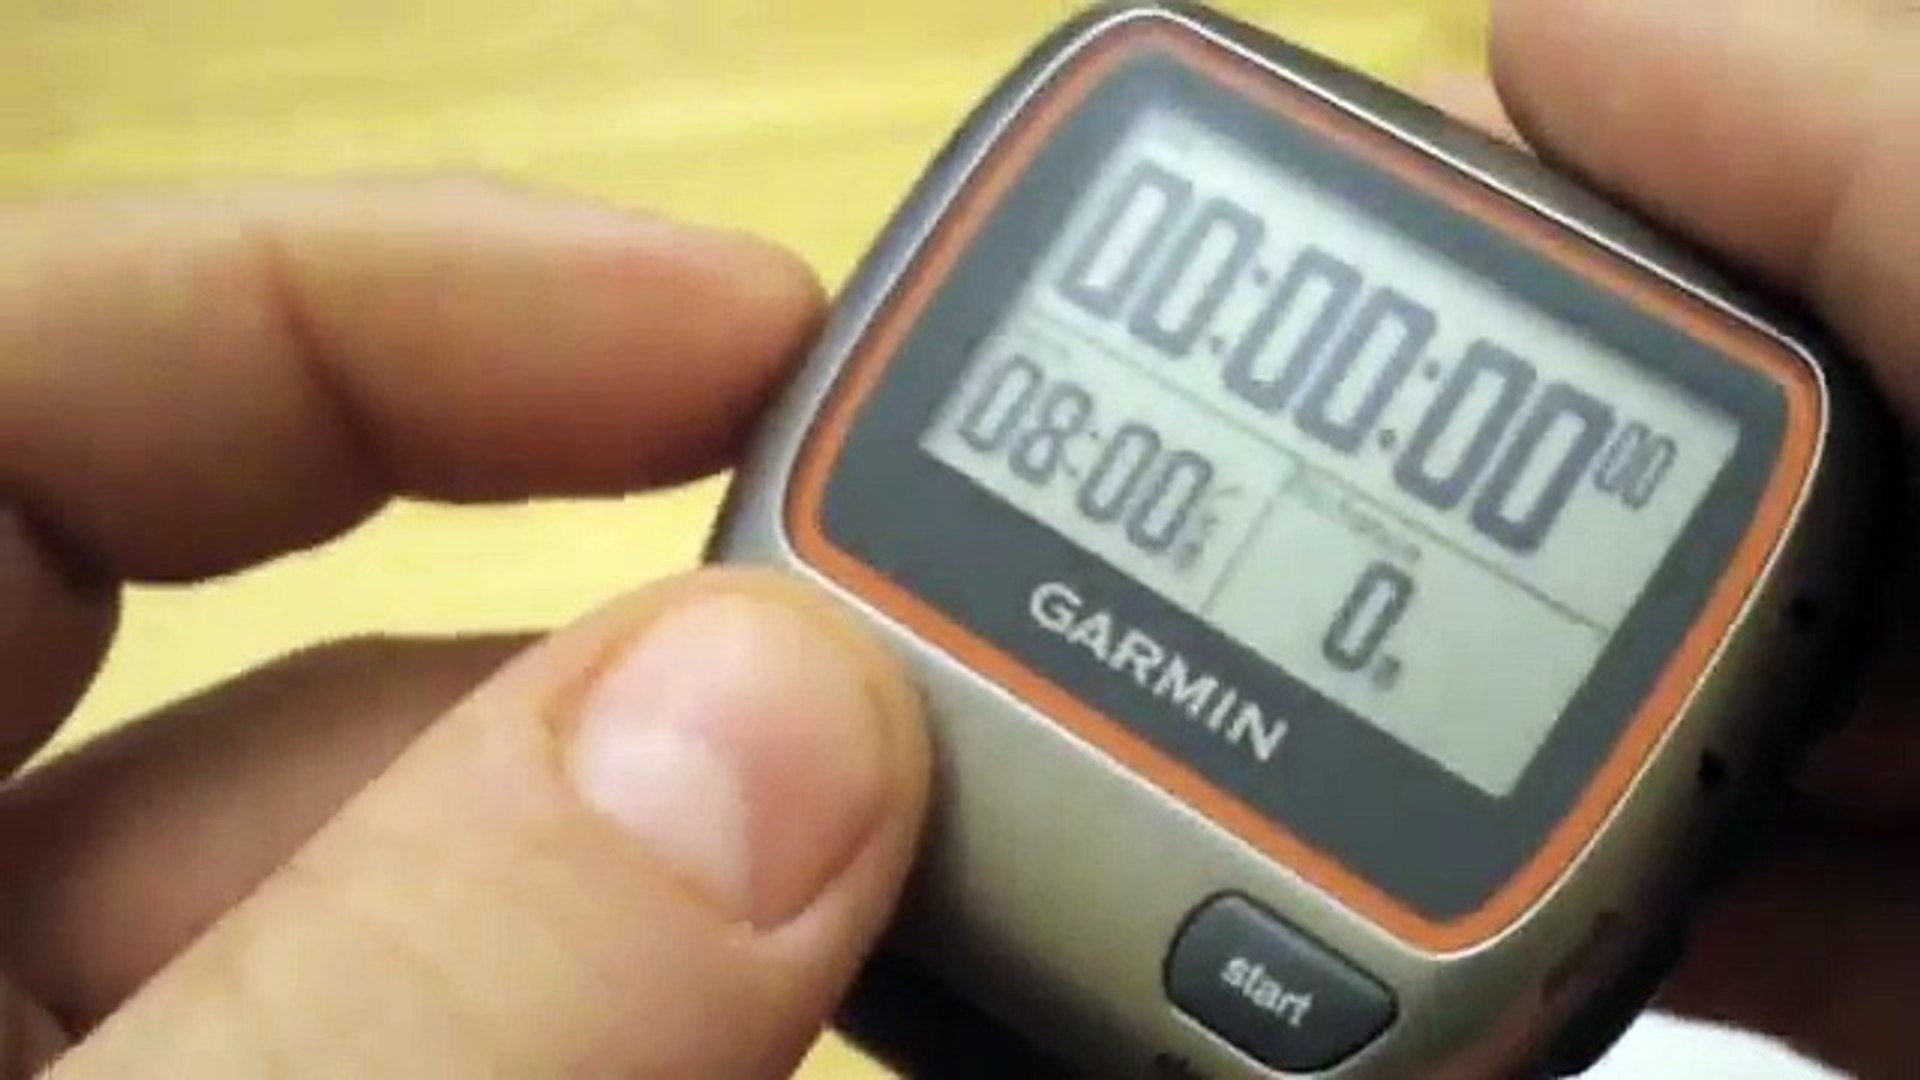 Garmin Forerunner 310 XT to Reset Your Device When it Dead - Resetting - video Dailymotion